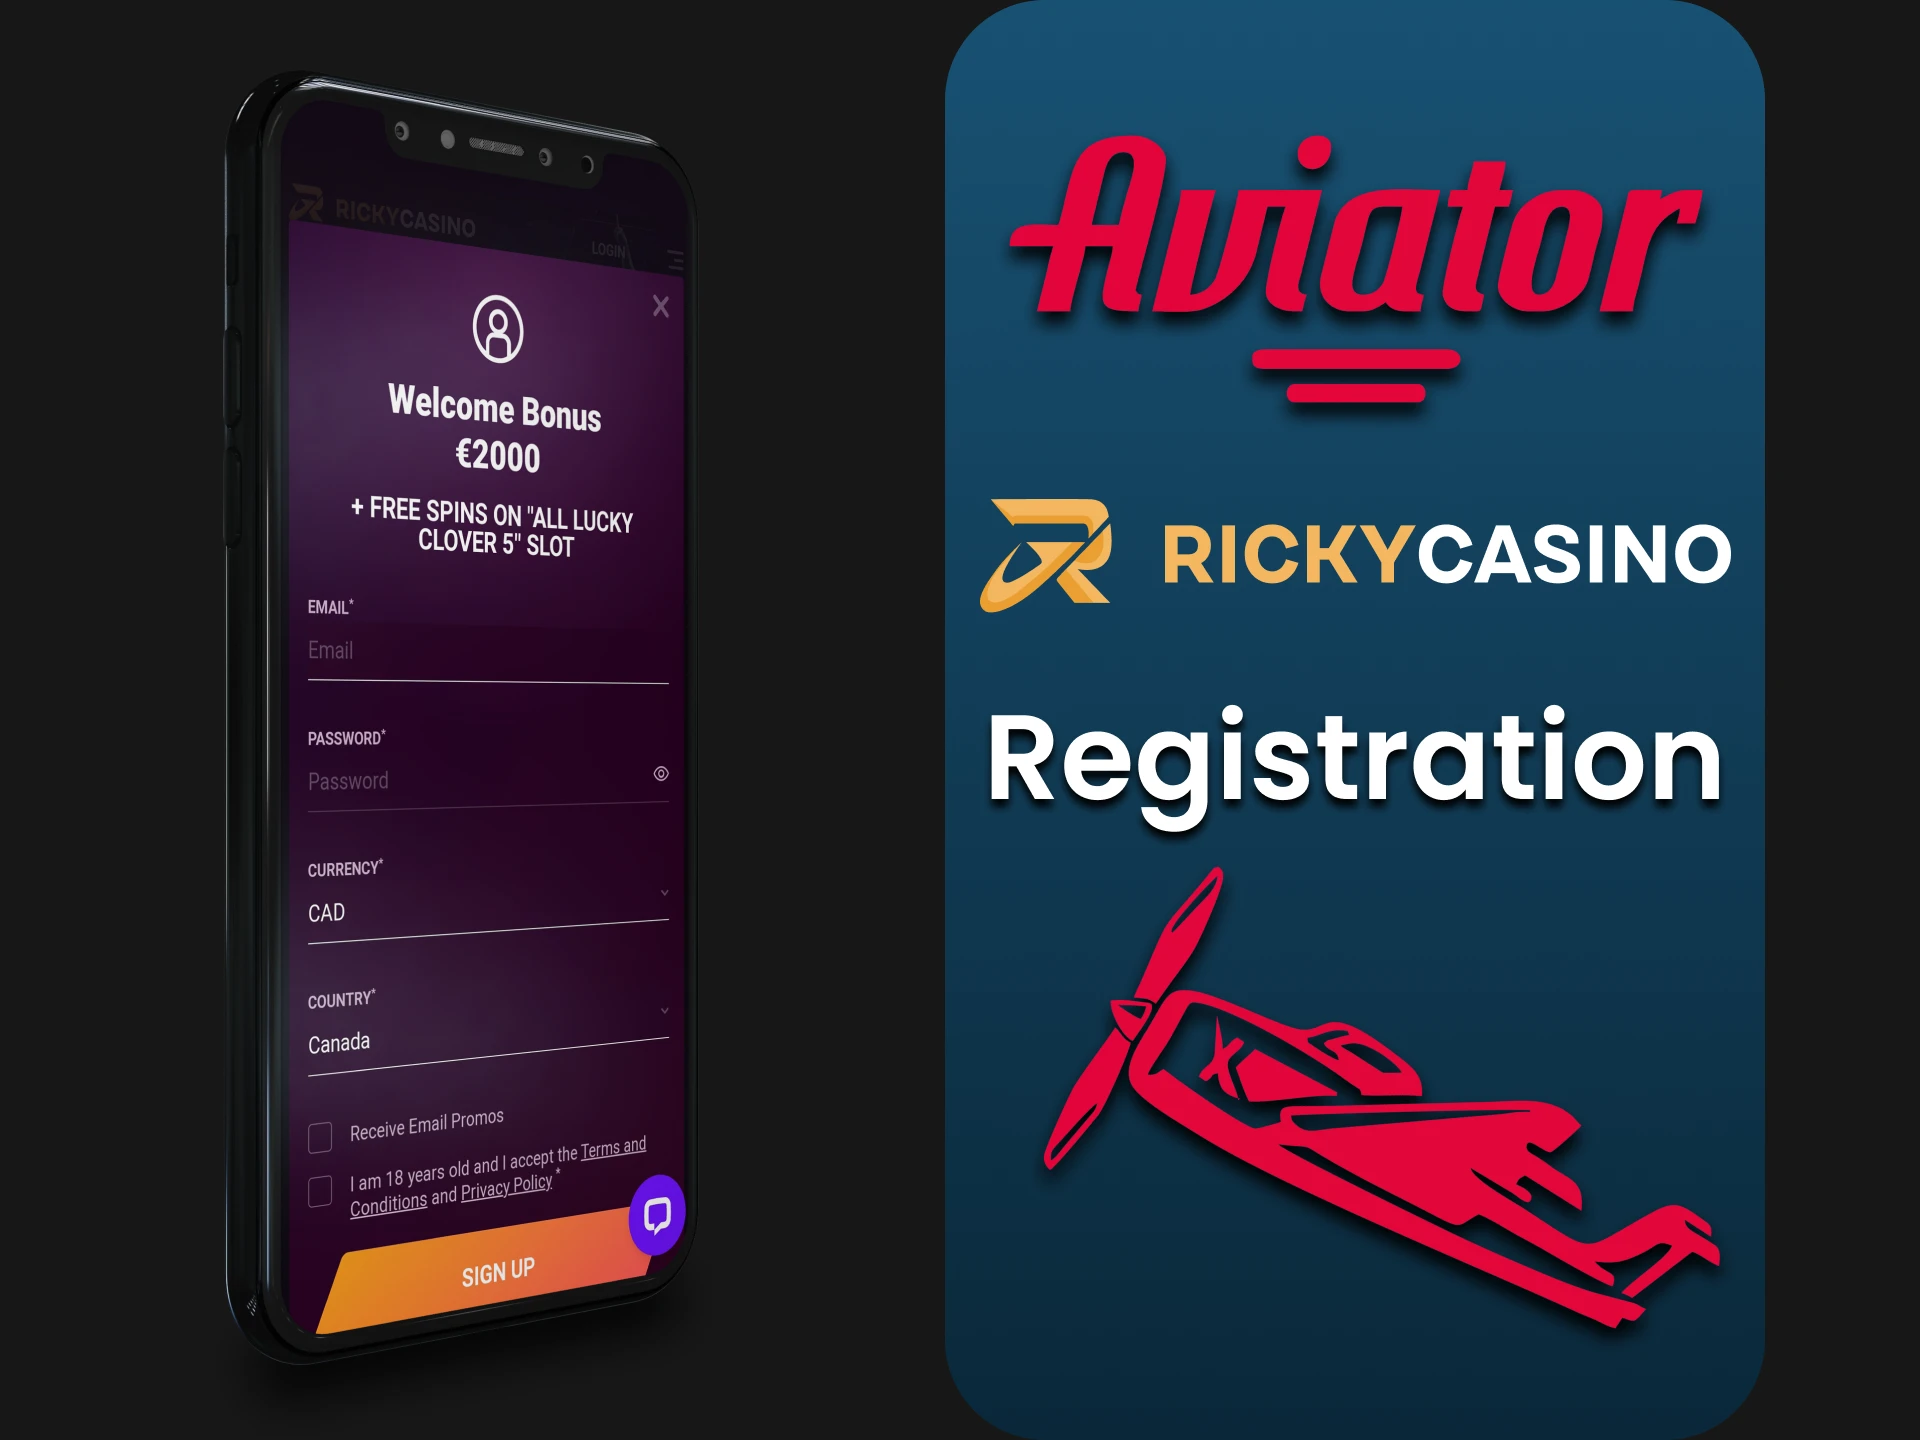 Play Aviator after registering in the Ricky Casino application.